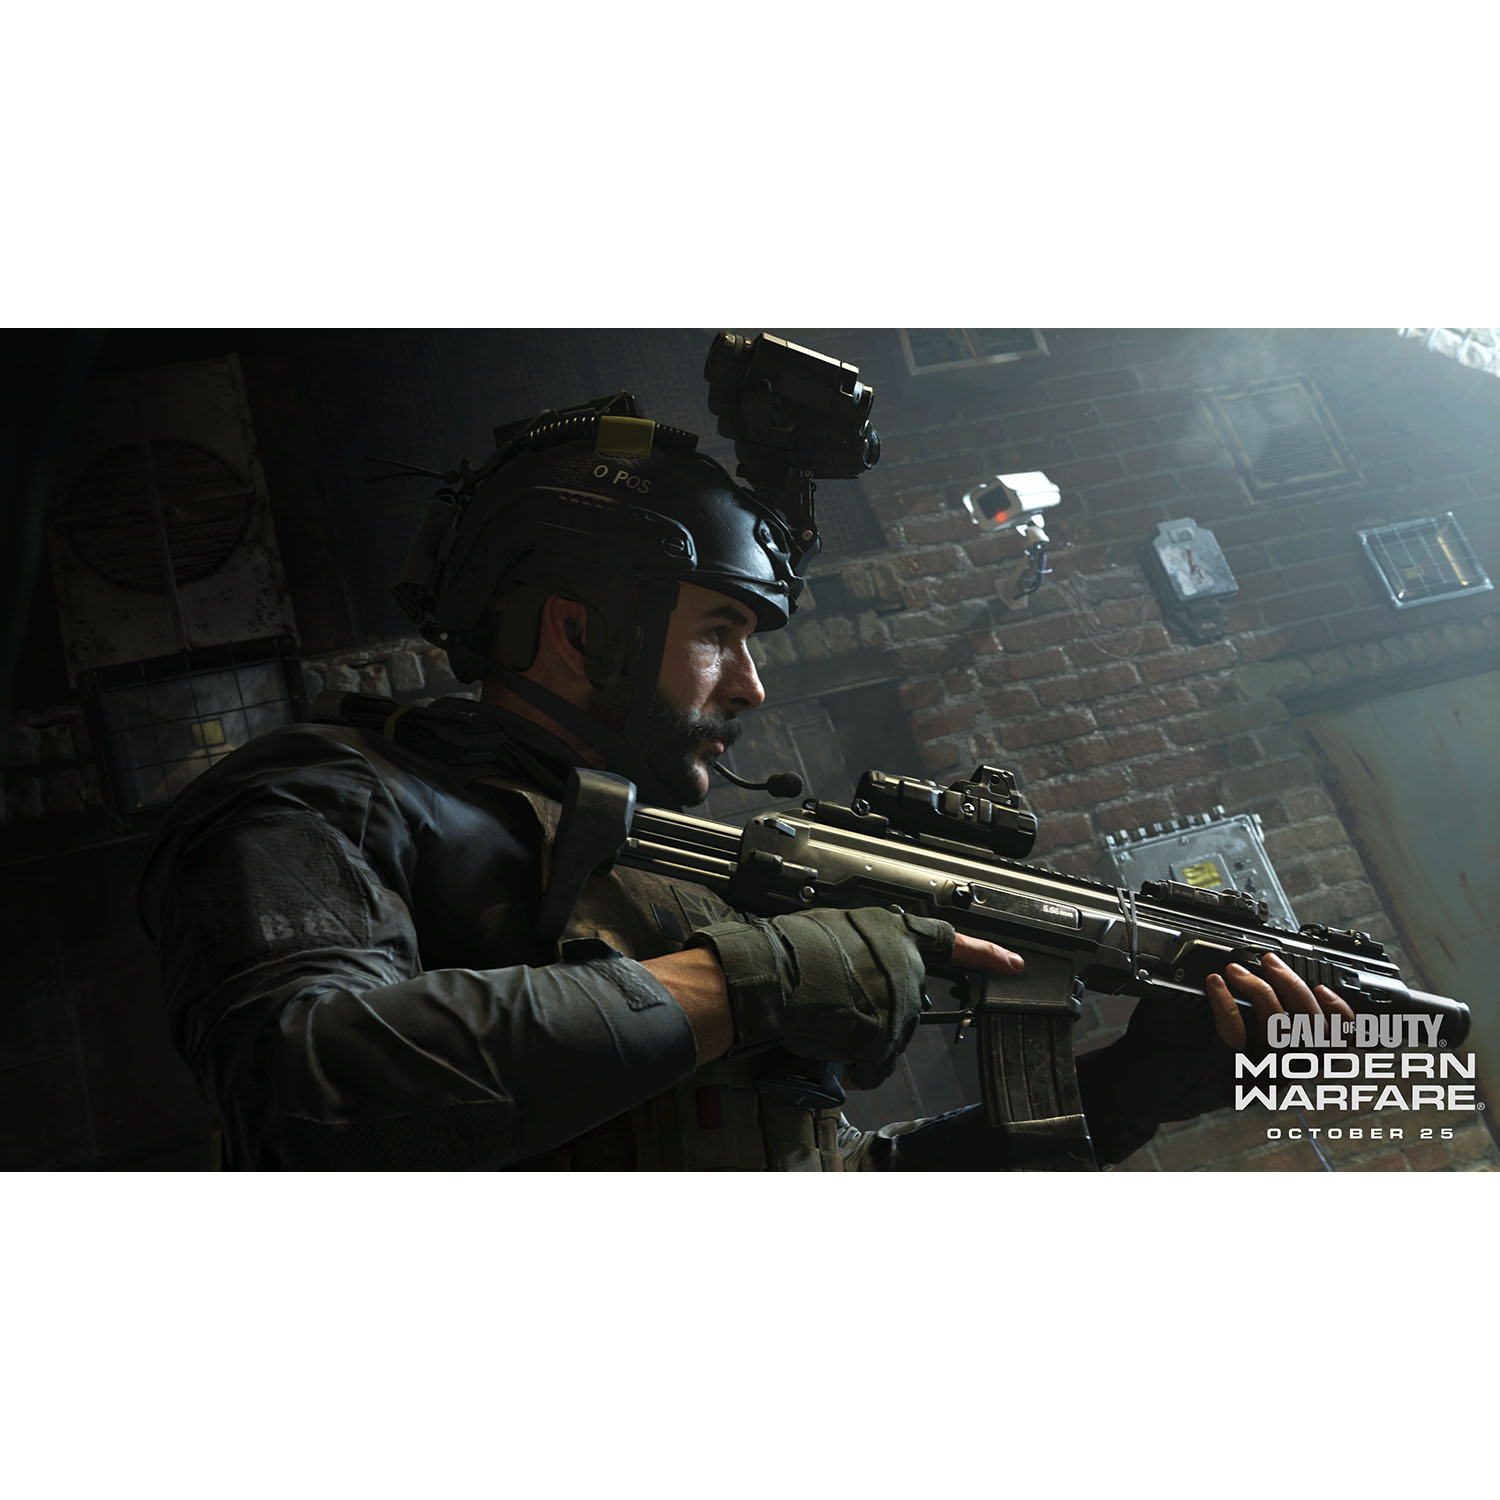 Call of Duty: Modern Warfare, Activision, PlayStation 4, [Physical], 047875884359 - image 2 of 4